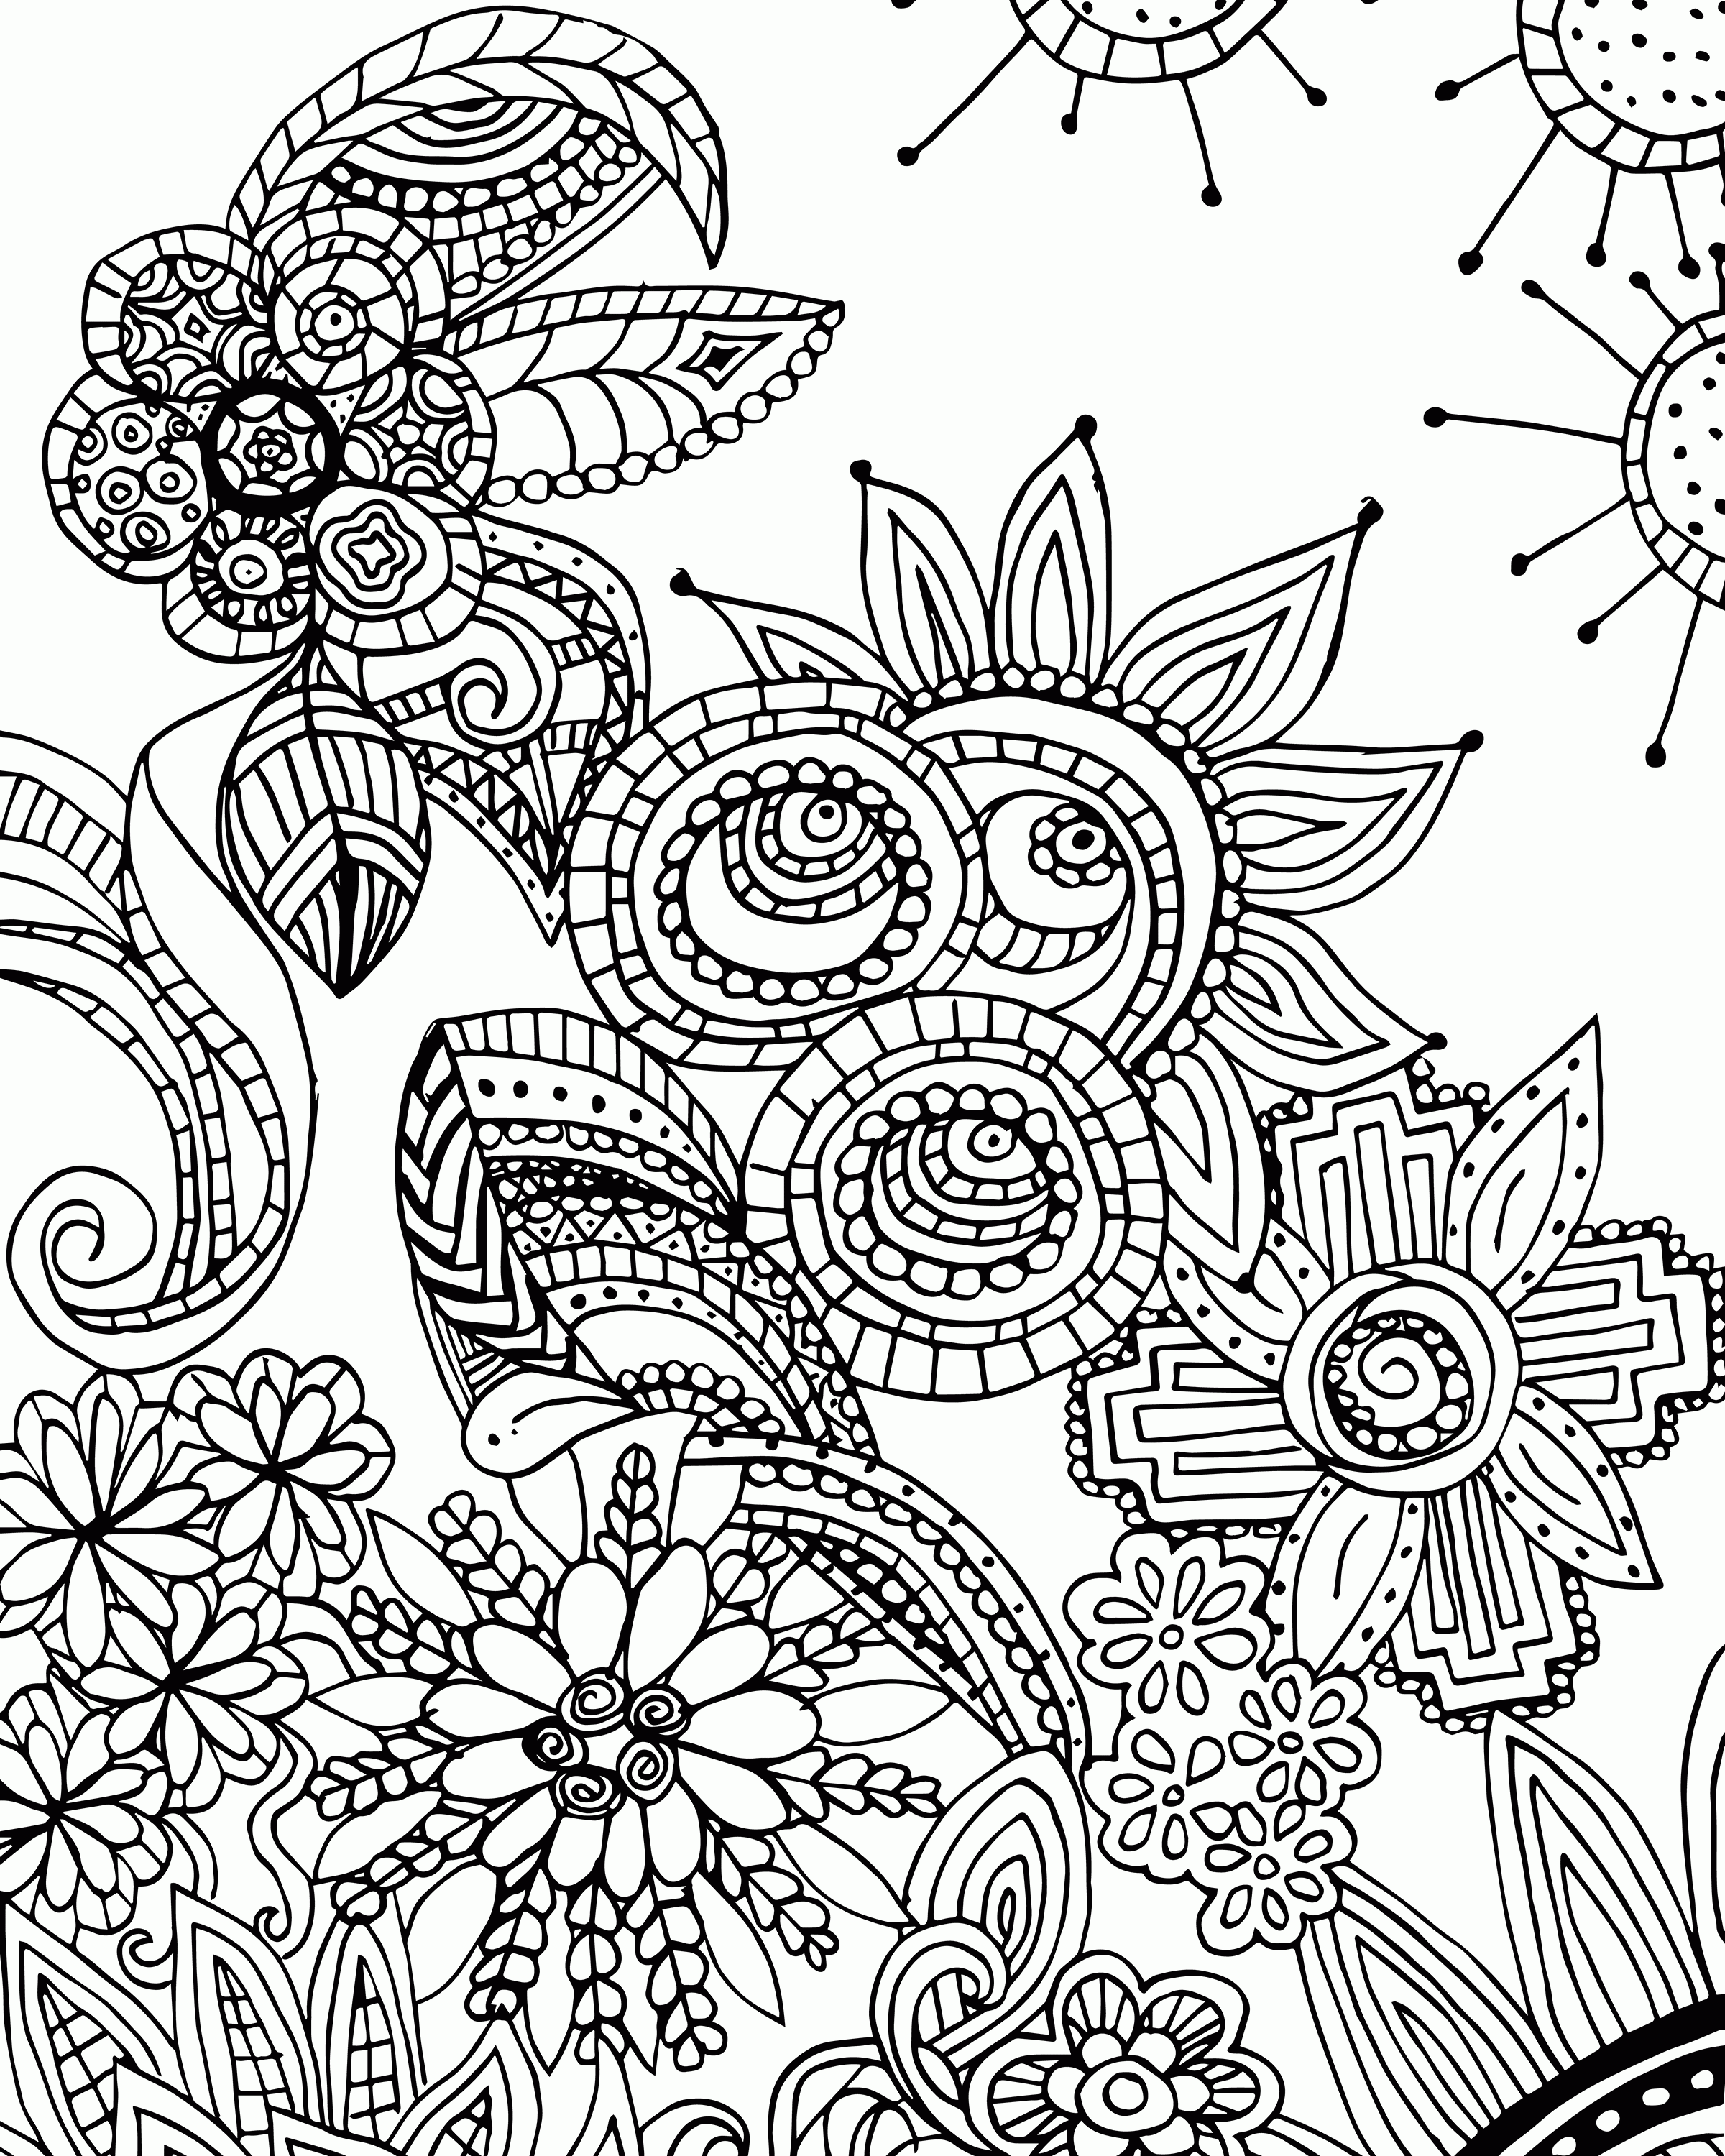 Doodle Art Printables - Coloring Pages for Kids and for Adults